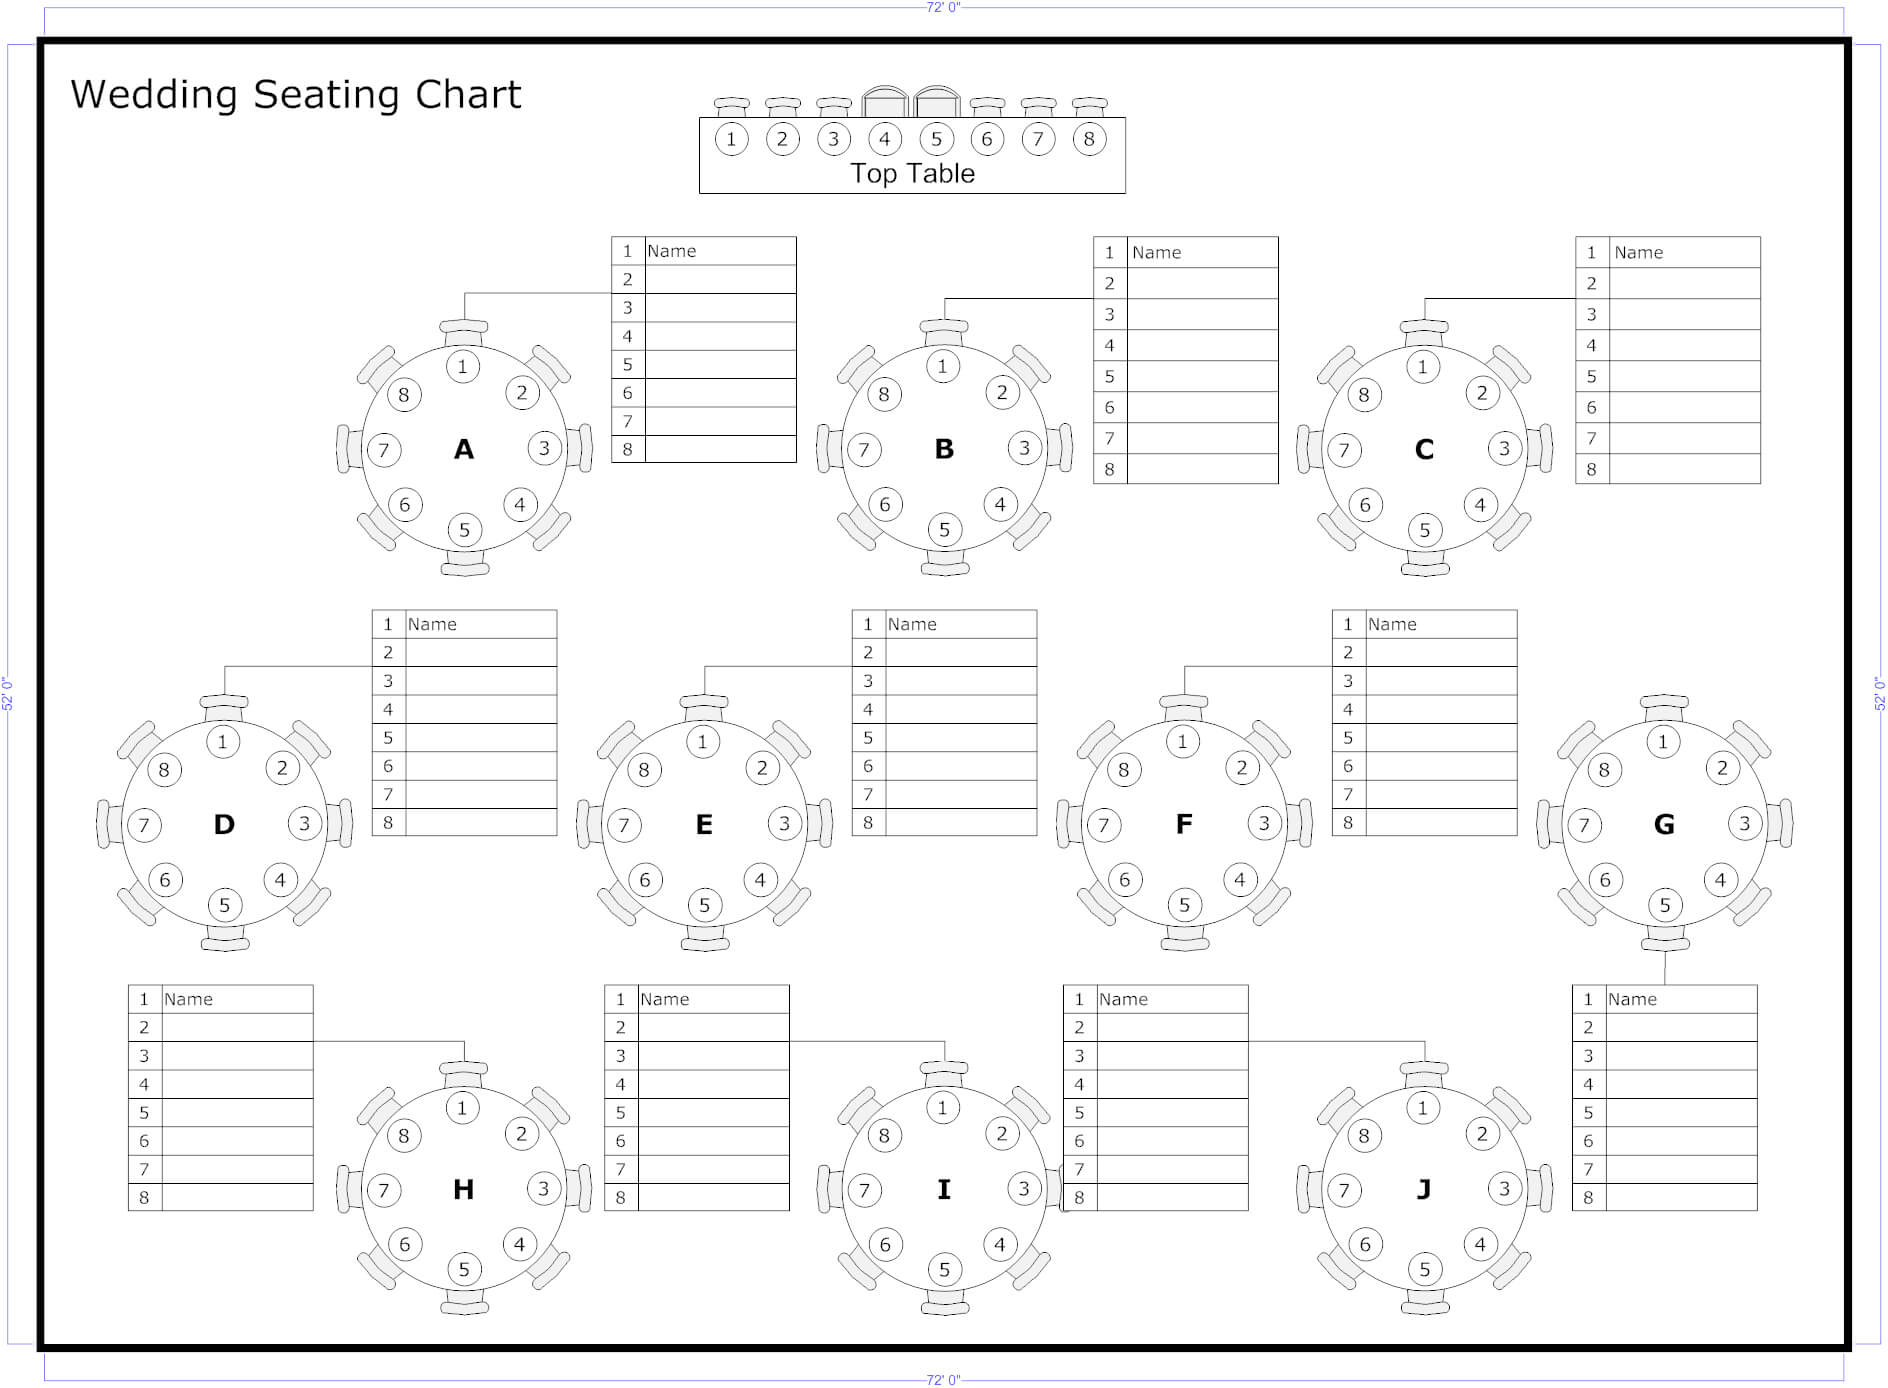 Tips To Seat Your Wedding Guests | Seating Chart Wedding For Wedding Seating Chart Template Word